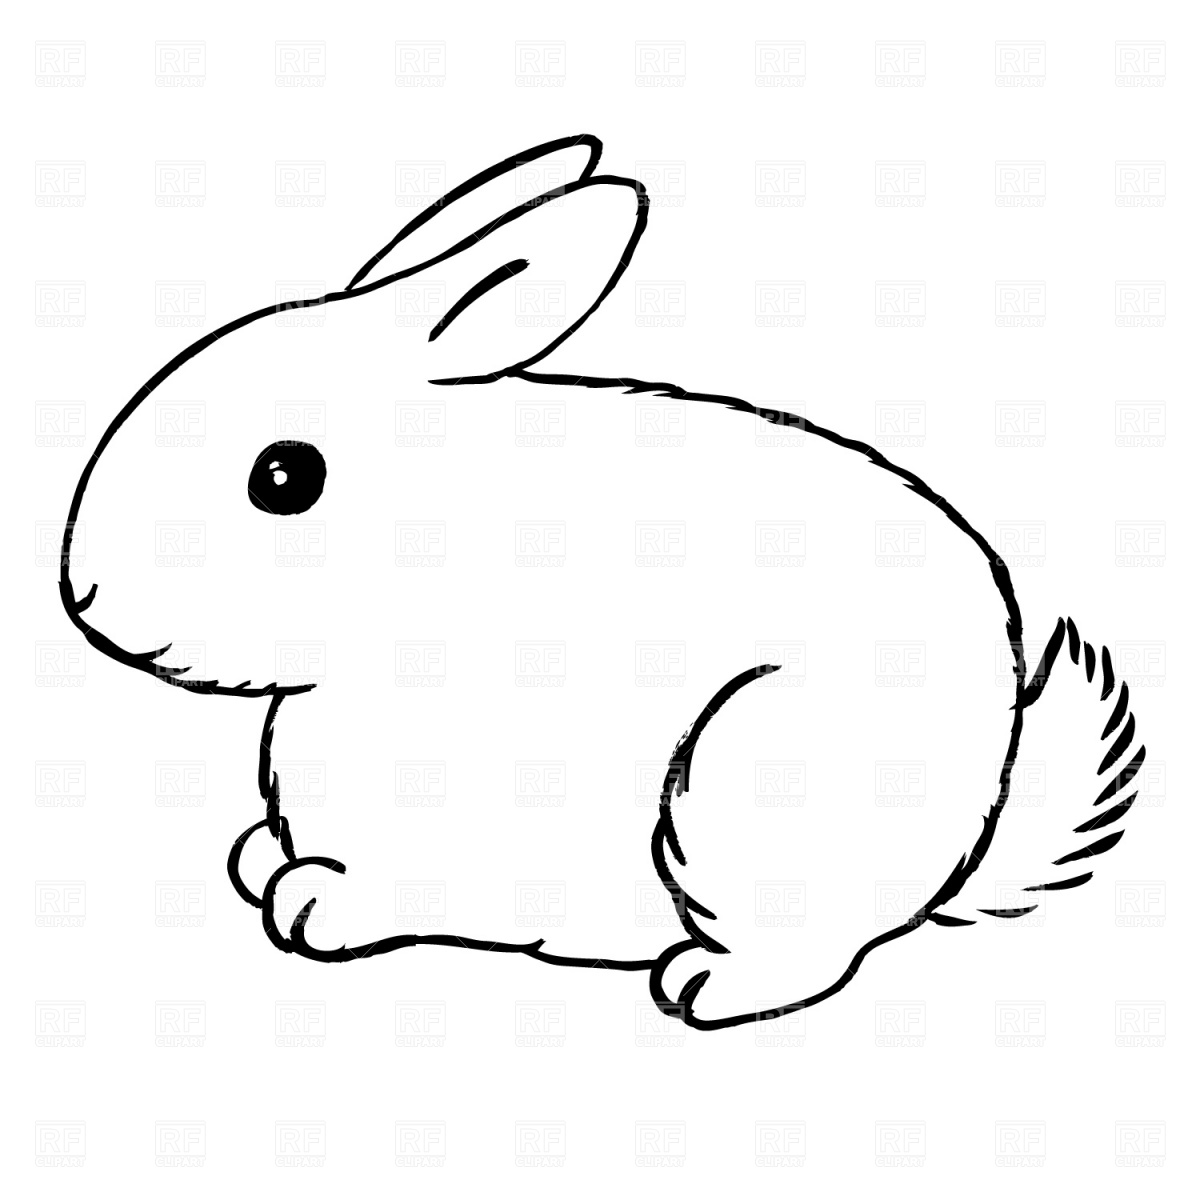 Bunny clipart black and white free clipart images 2 - Cliparting.com